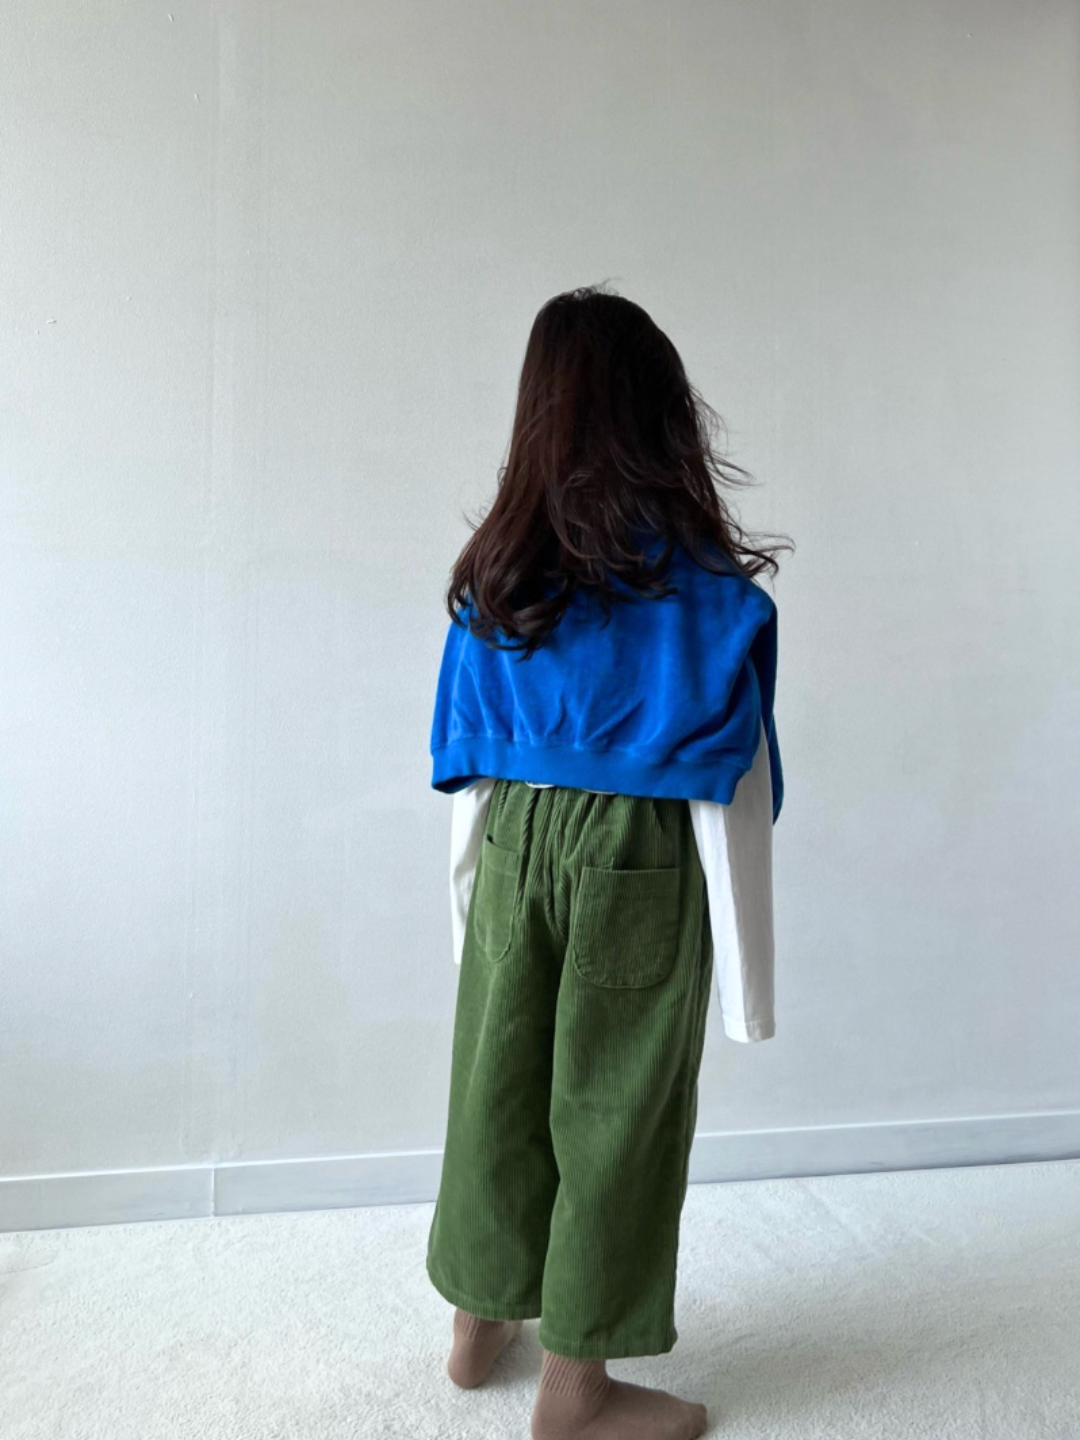 Moss | A girl wearing kids wide-leg corduroy pants in moss green, paired with a white t-shirt with three stripes in pink, red and green. A royal blue sweater is draped over her shoulders. She is standing on grey carpet with a white wall behind her, and facing backwards, showing the back view of the pants.